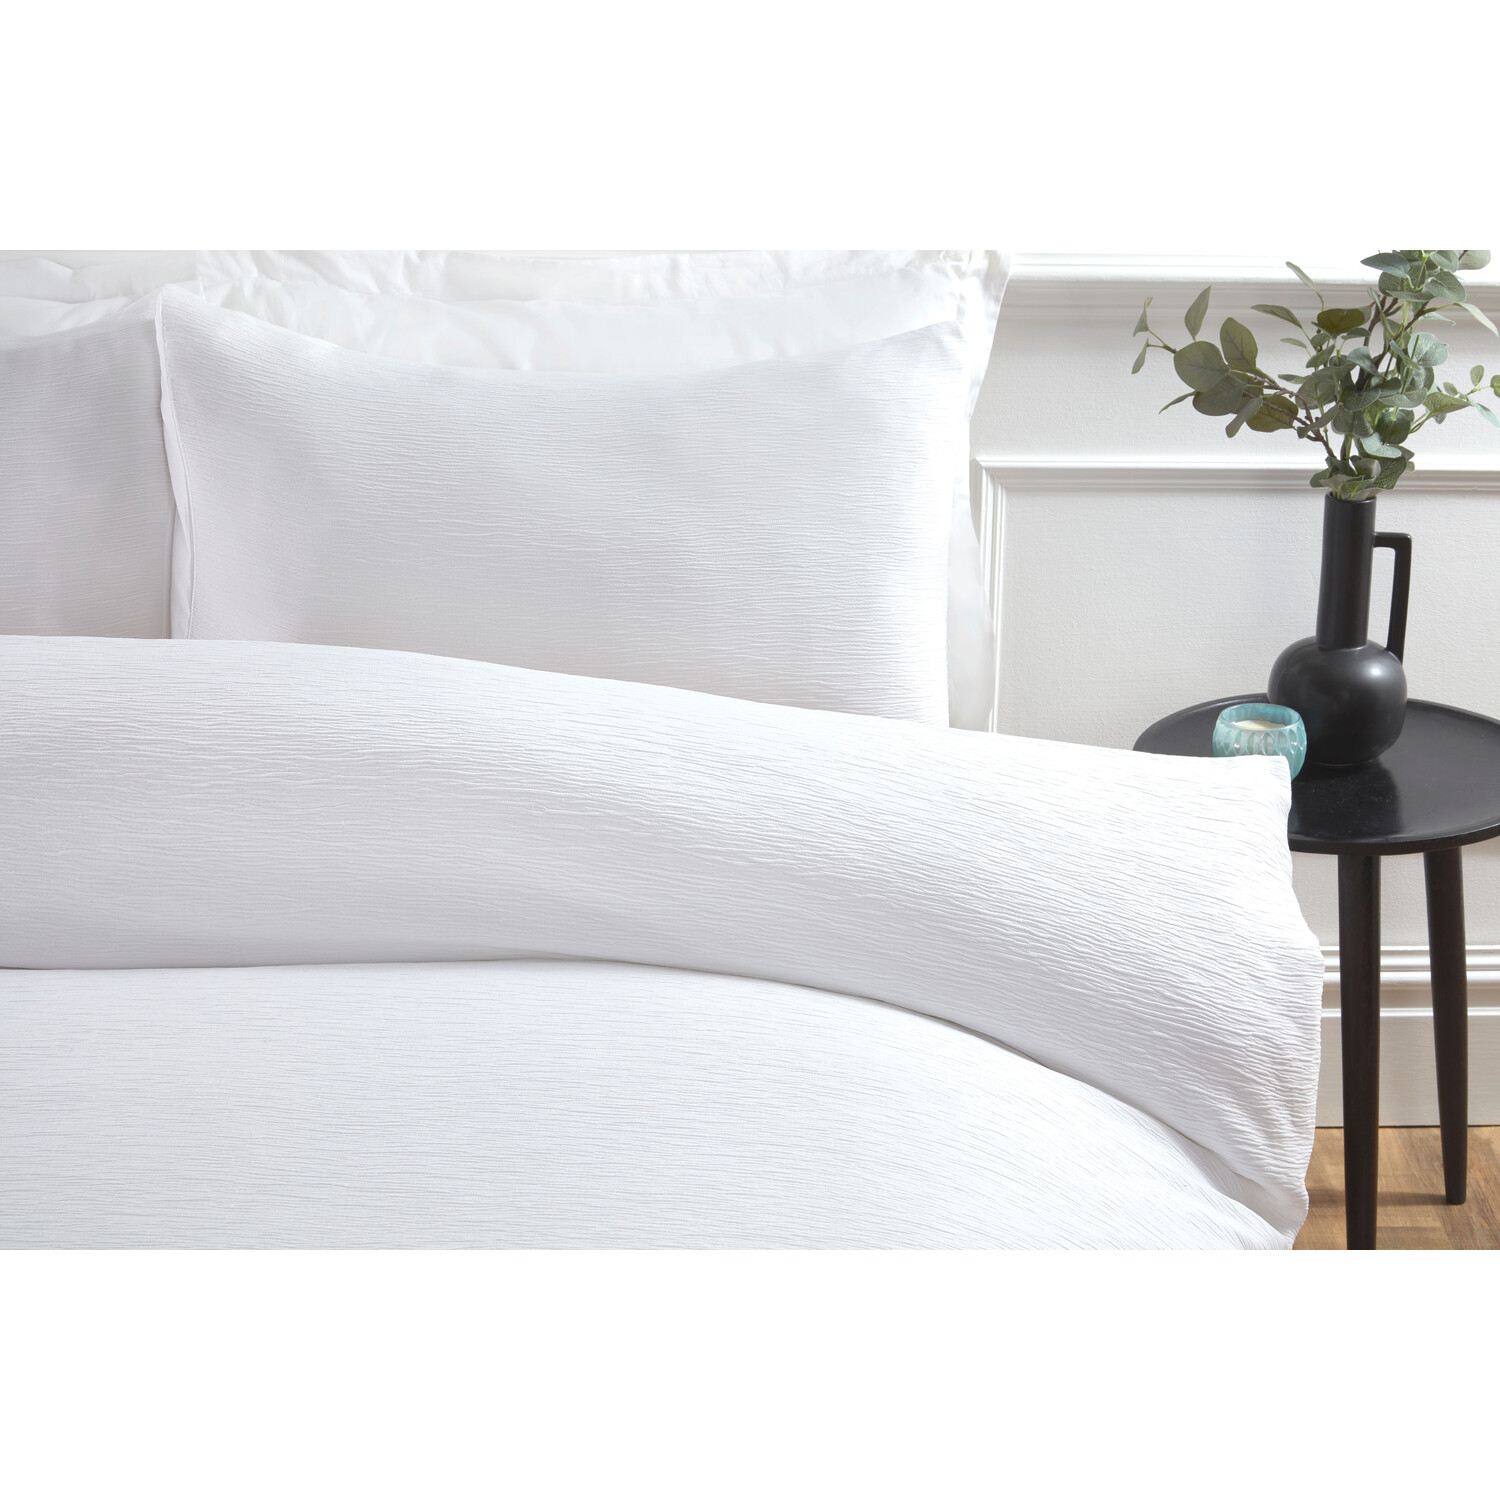 My Home Milan Double White Textured Duvet Cover Set Image 3